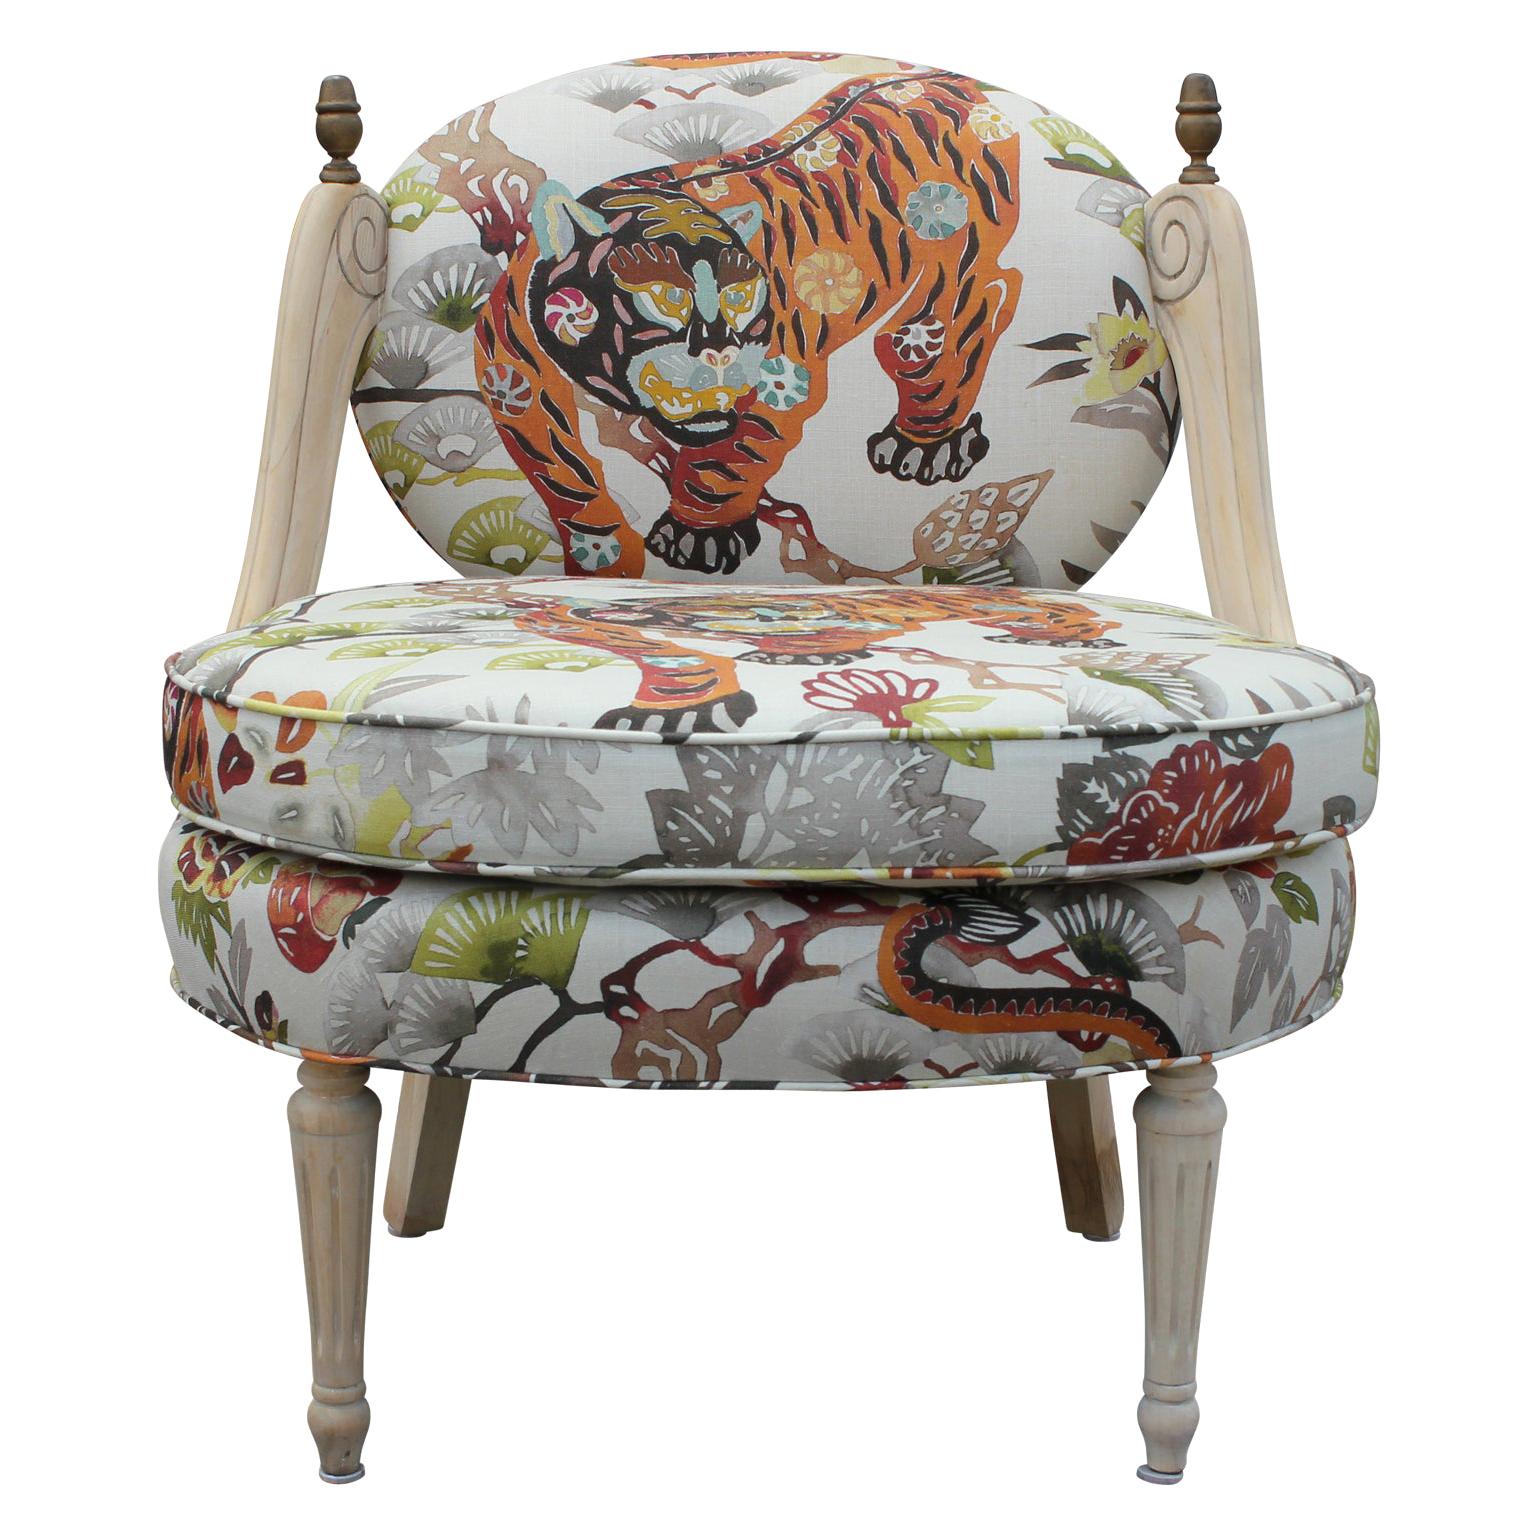 Hollywood Regency Lounge Chair with Natural Wood and Tiger Print Fabric